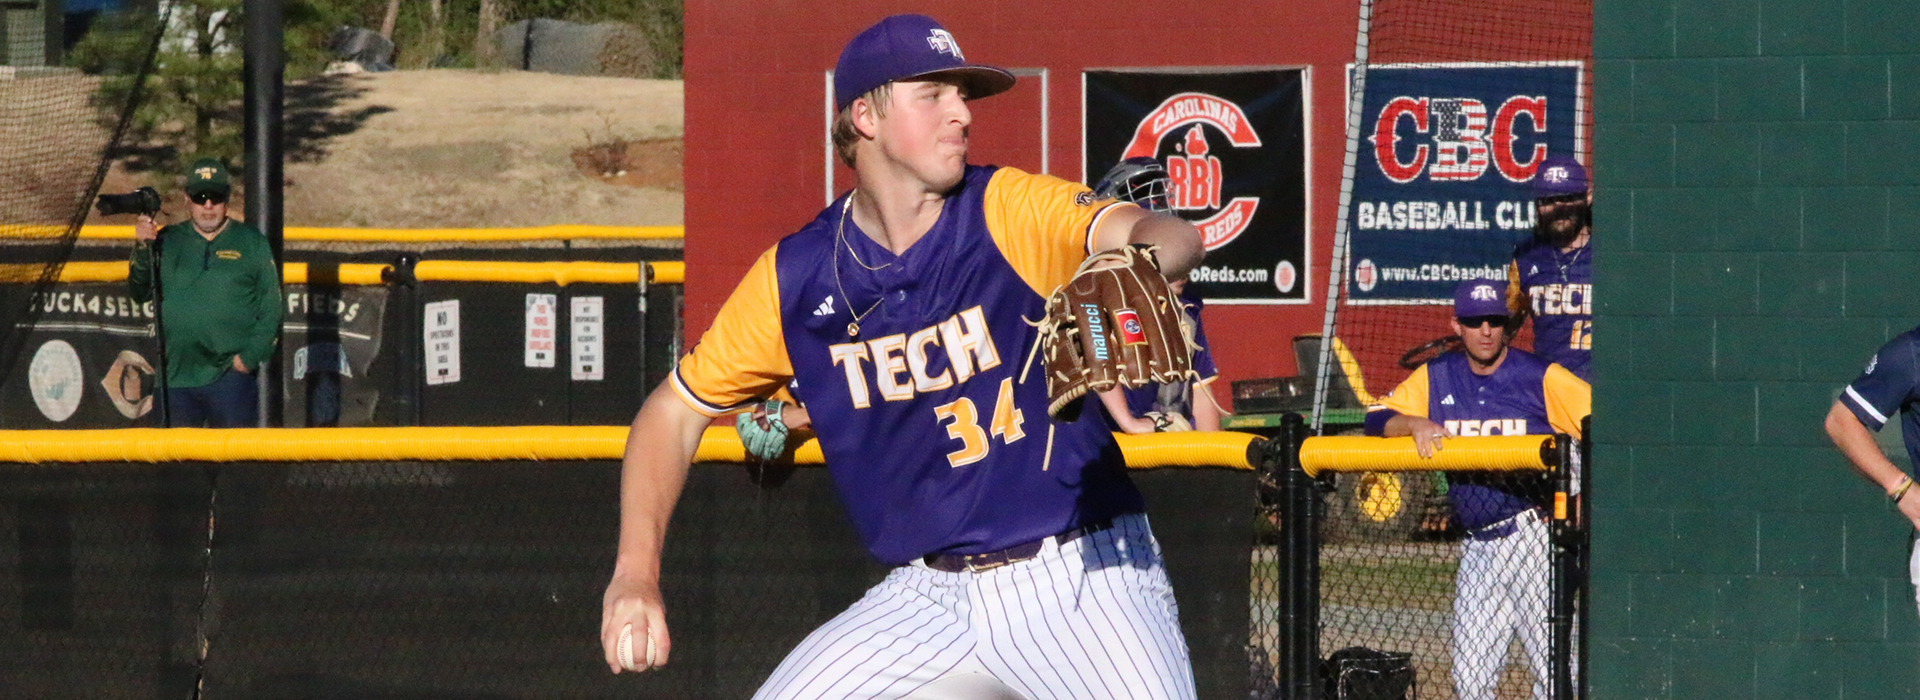 Tech rallies past Queens in the seventh to even weekend series